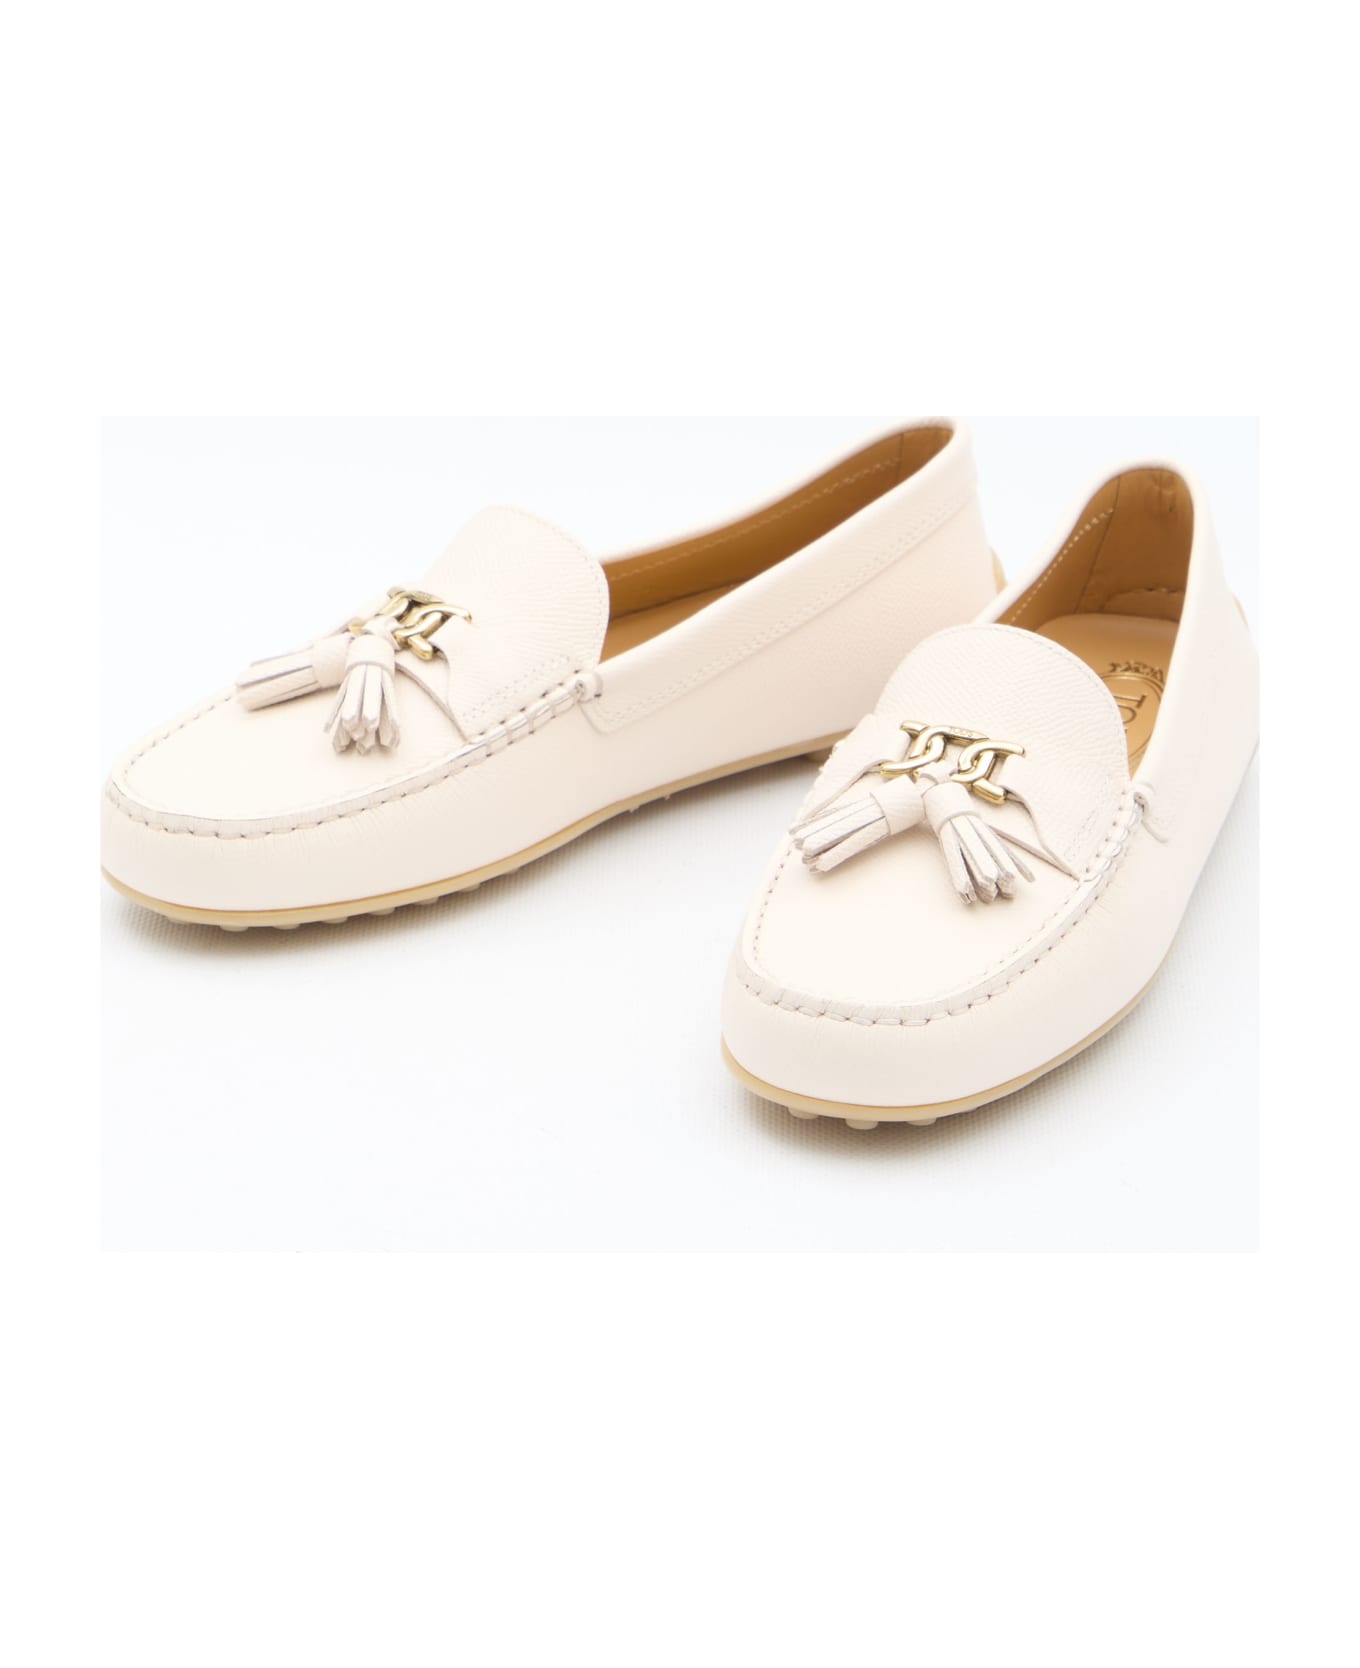 Tod's City Gommino Loafers - BEIGE